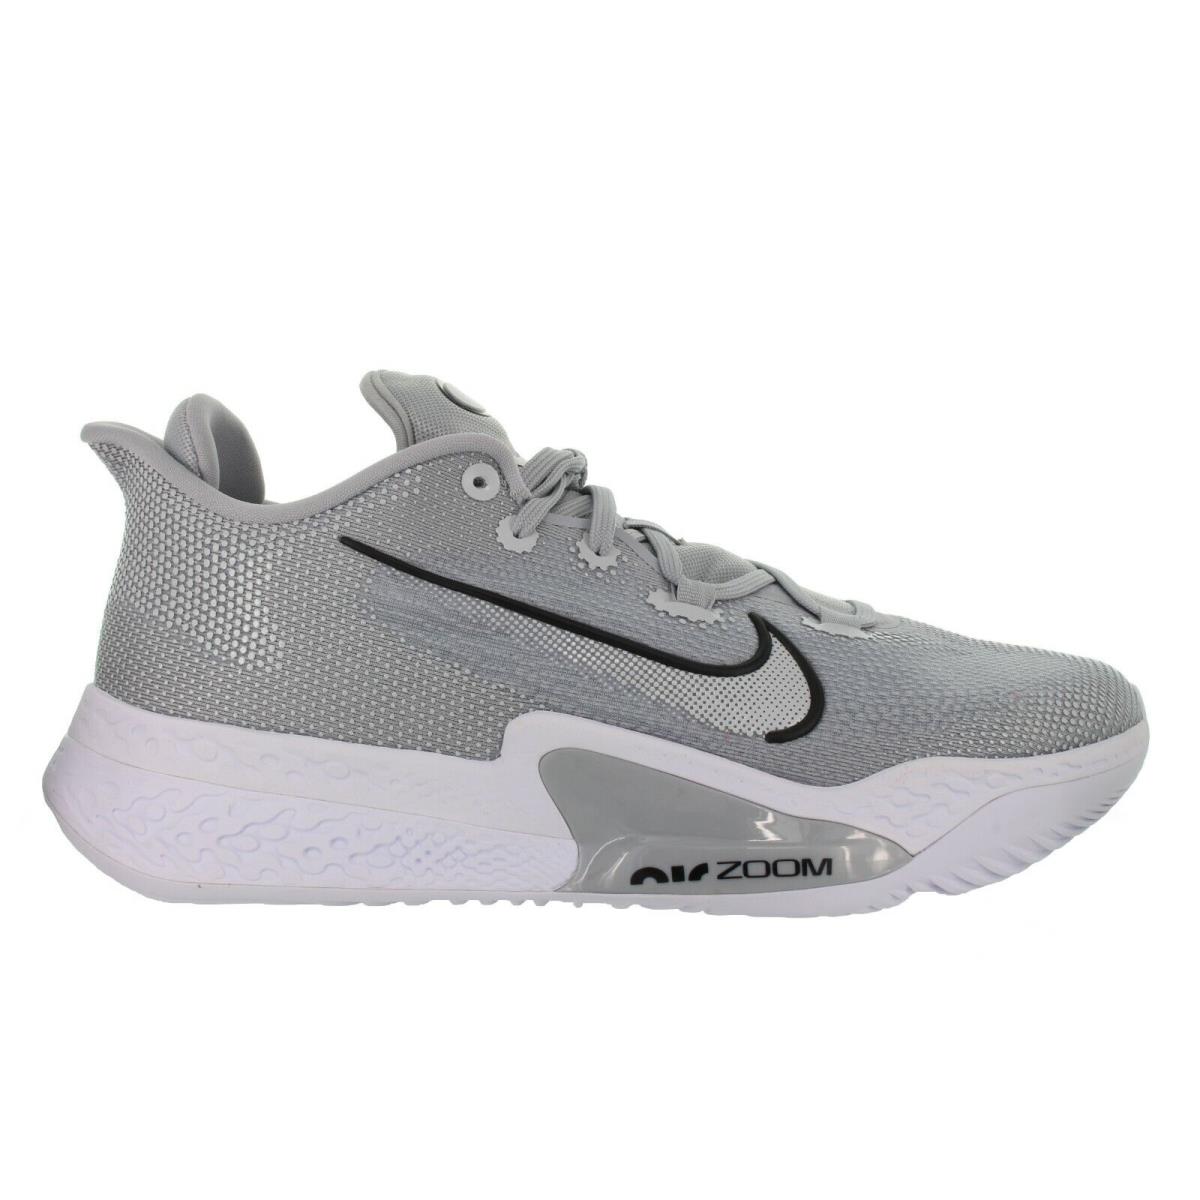 Nike Men`s Air Zoom BB Ntx TB Promo Wolf Grey Basketball Shoes Multiple Size - Wolf Grey, Black, White